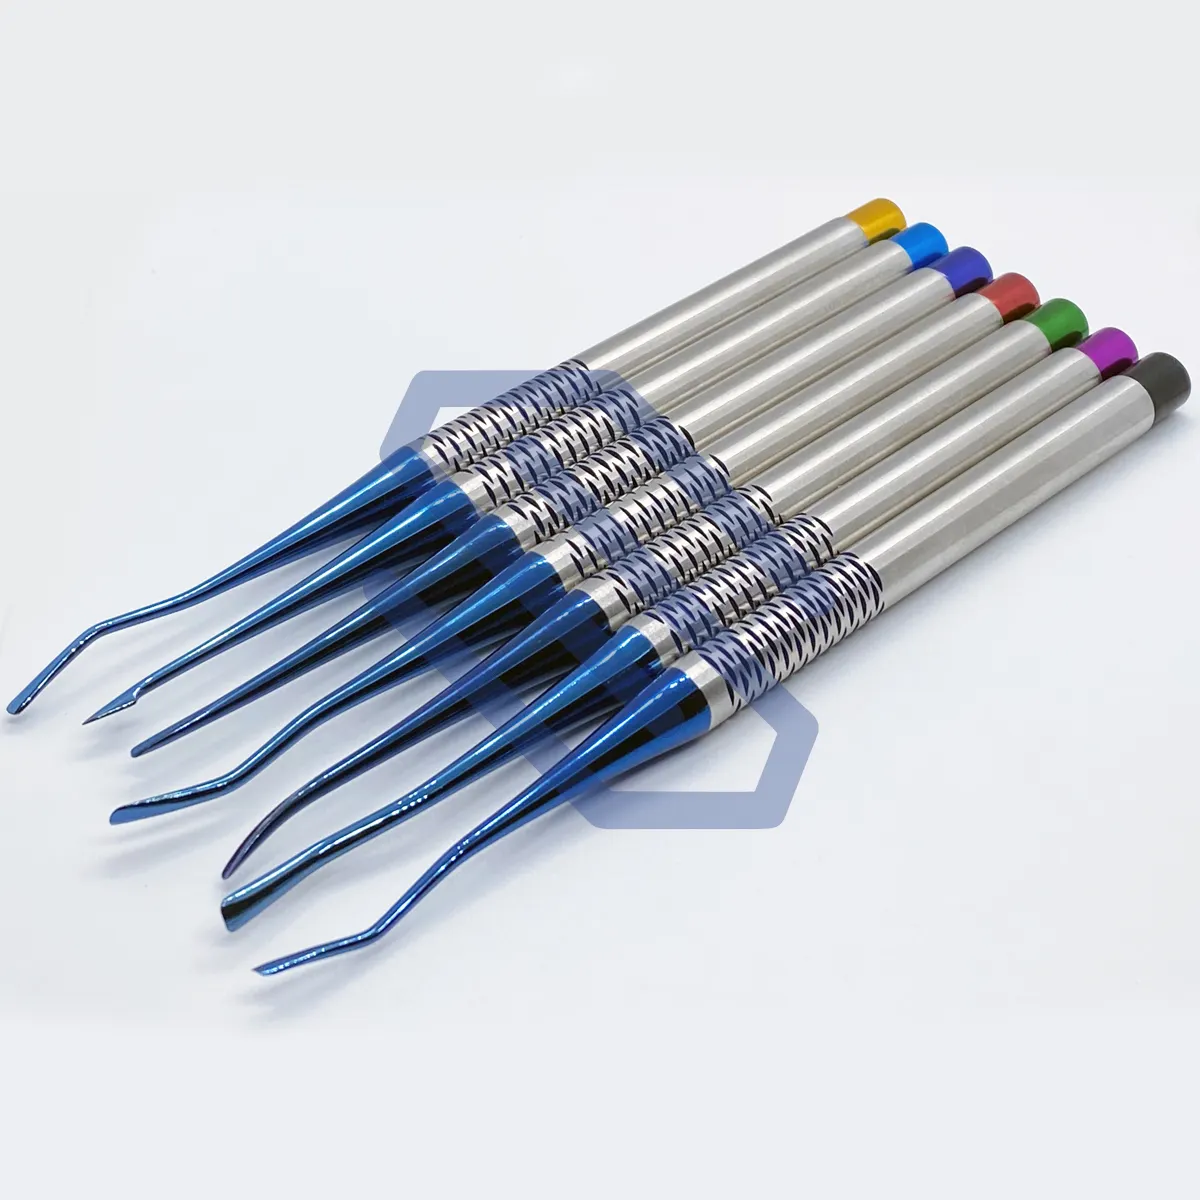 Set of 7 Luxating Elevators PDL Blue Precise Tips Dental Surgical Veterinary CE